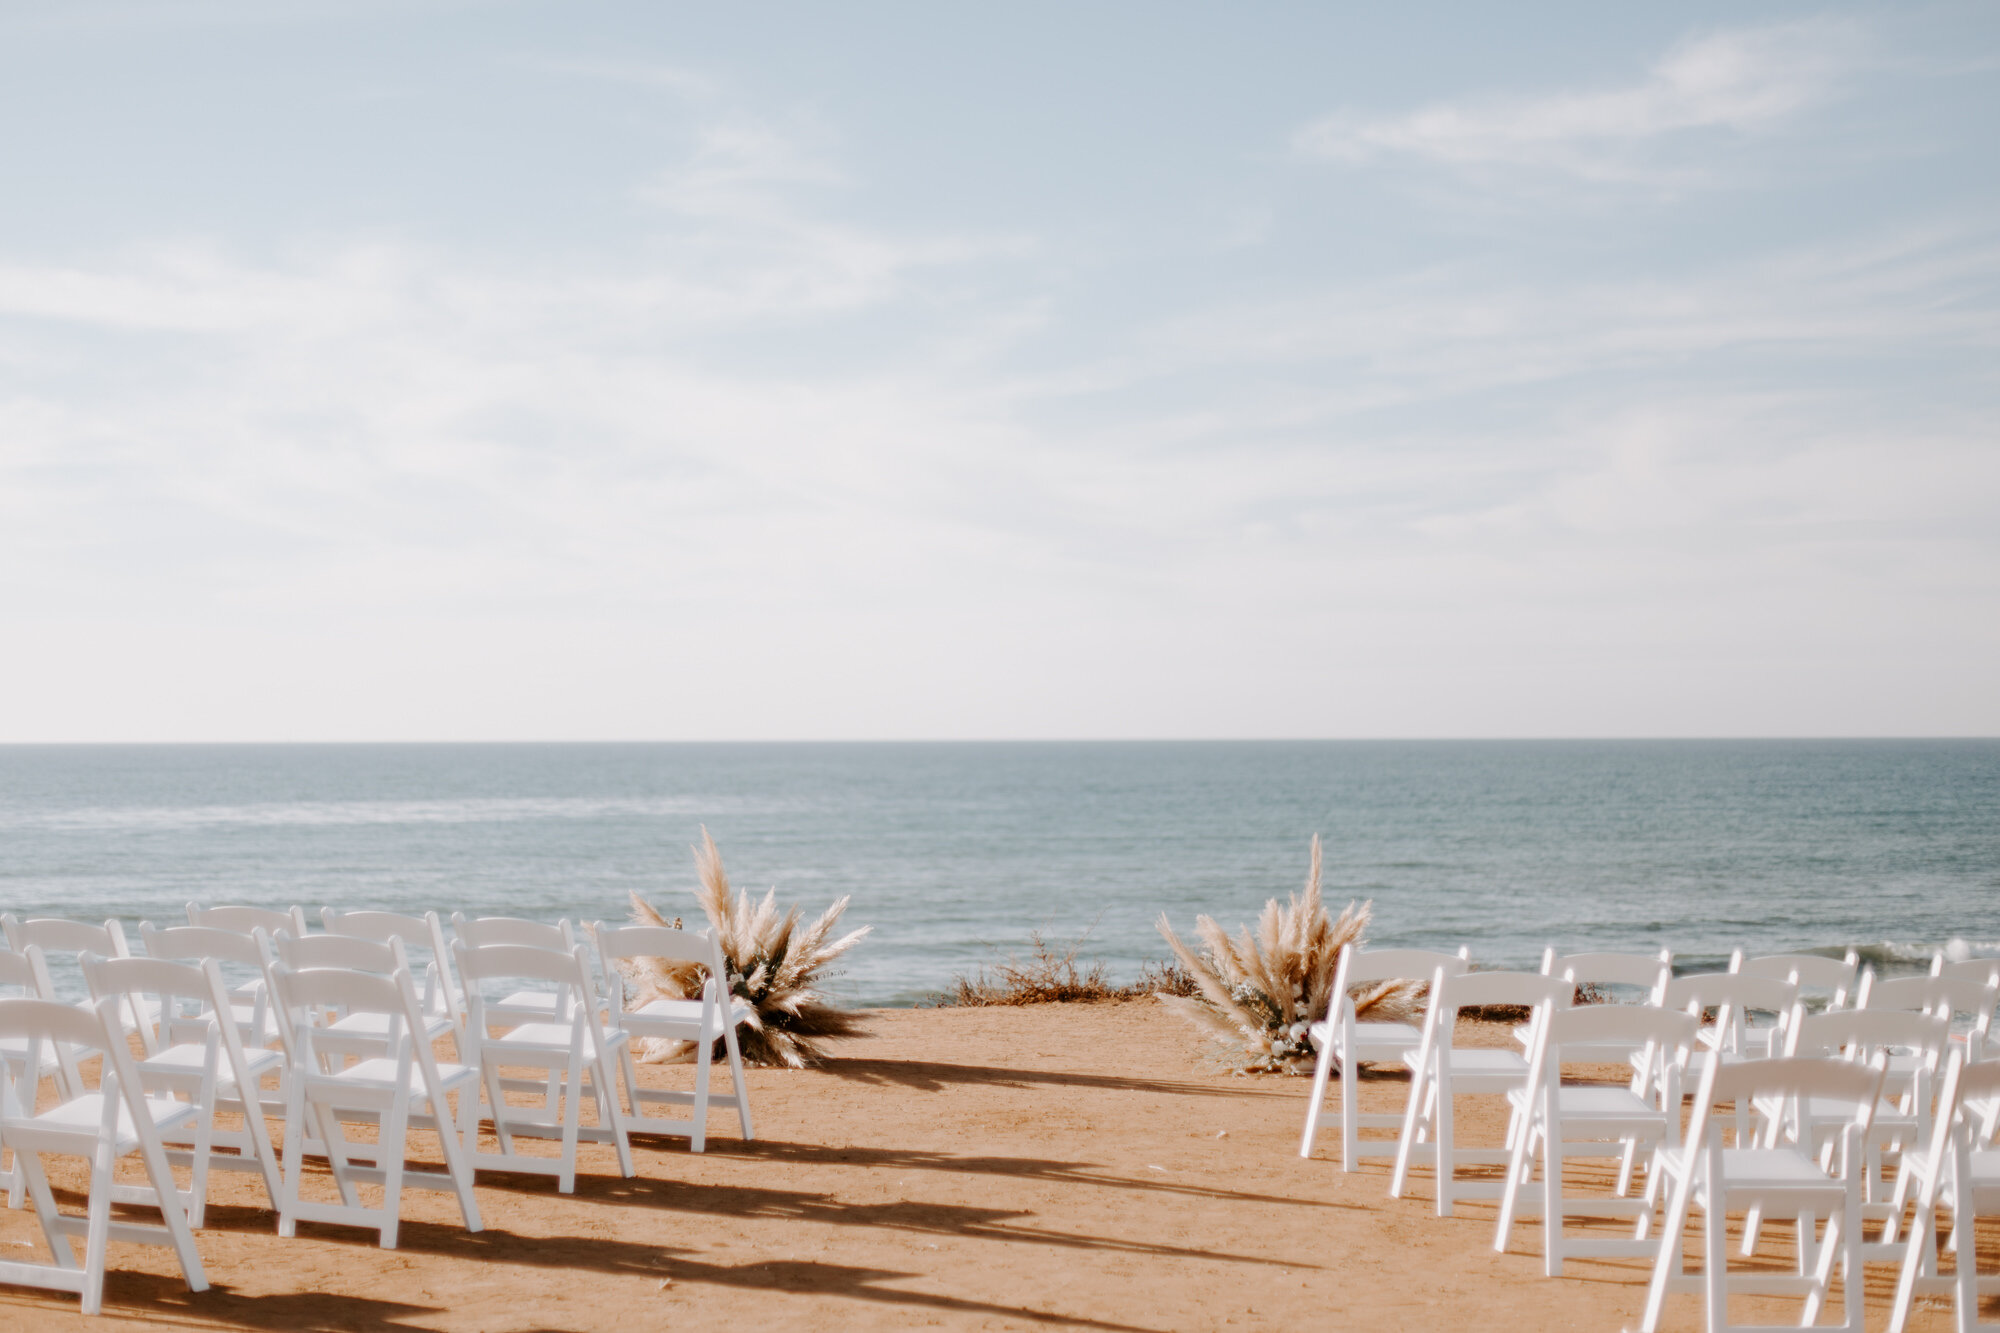 Sunset cliffs wedding, elopement in point loma san diego. Wedding and elopement with pampas grass and pink tones in the bouquets. This was a bohemian or boho styled wedding near the beach.